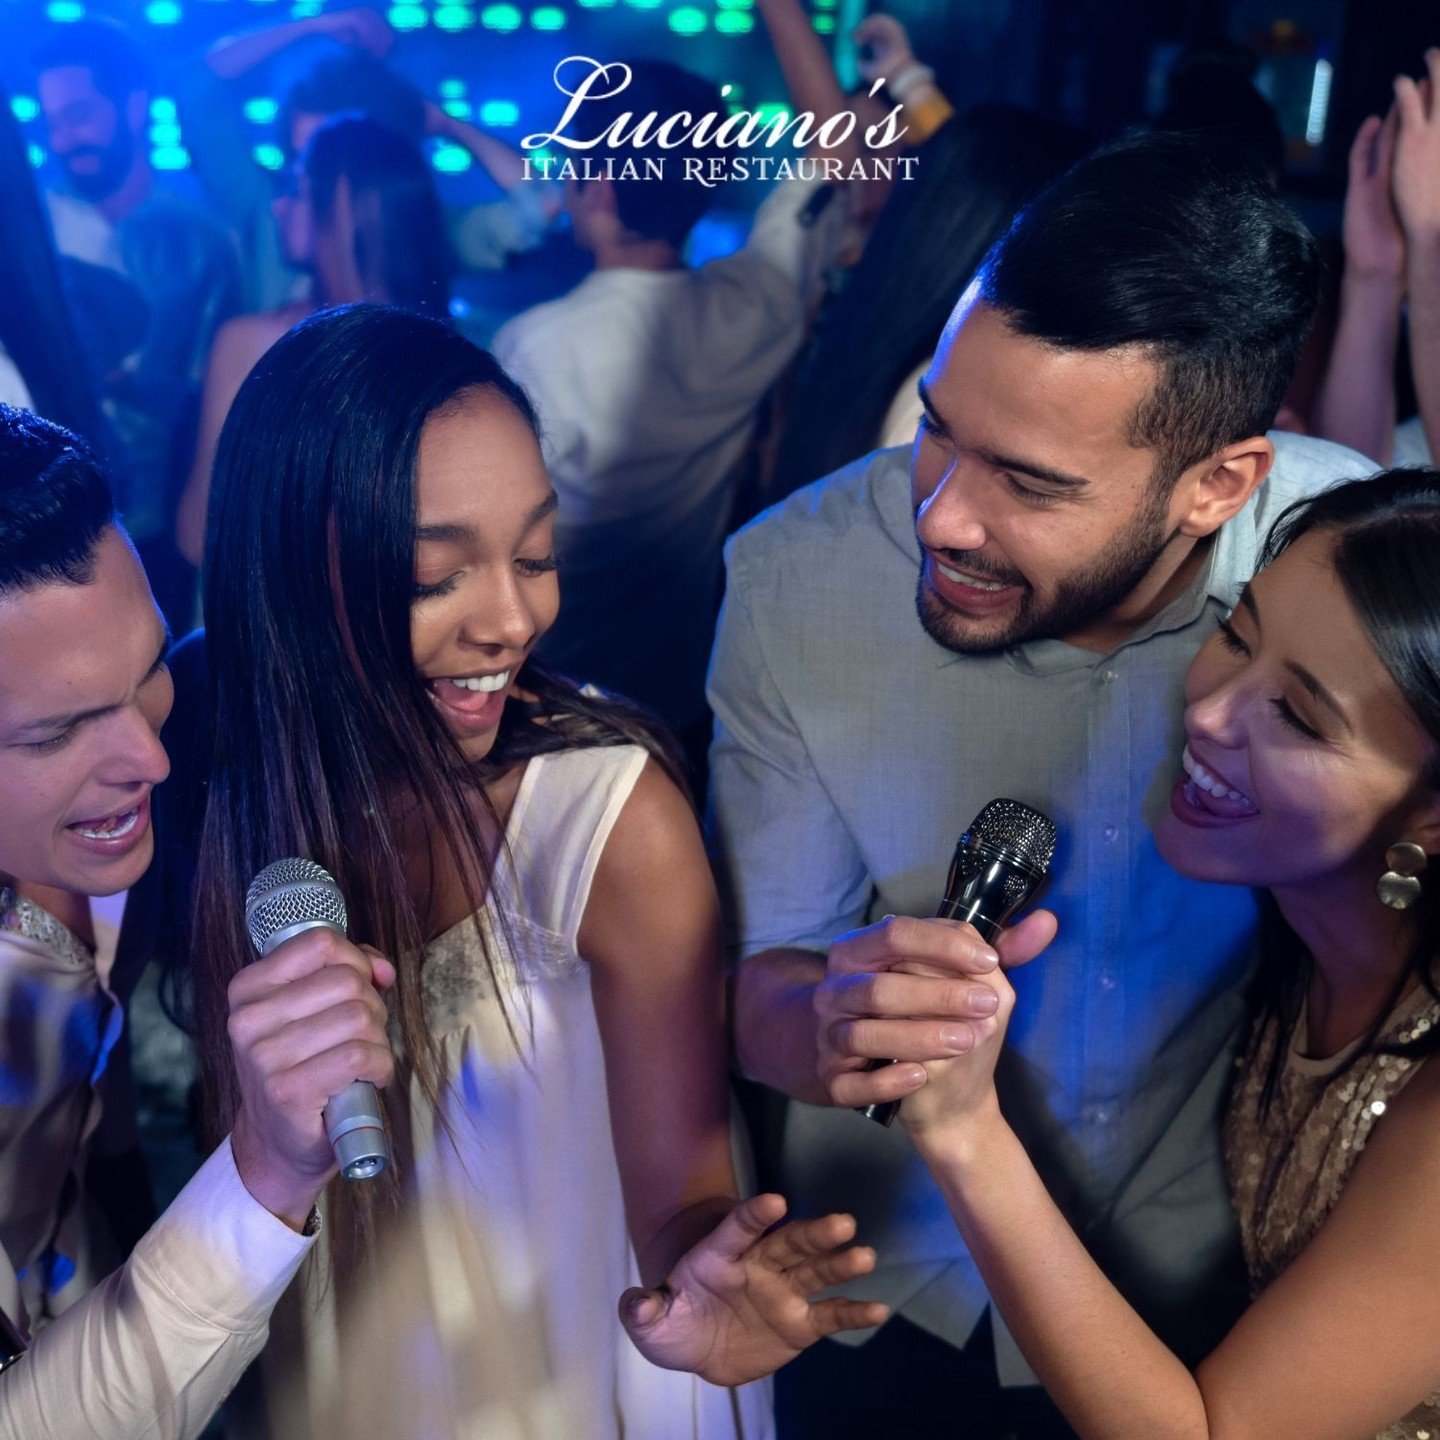 Head to Luciano's tonight for Karaoke Night from 8:30 PM to 12:00 AM! Come sing your heart out and enjoy drink specials&mdash;$6 and $7 drinks, plus deals on beer and wine. Don&rsquo;t miss the fun!